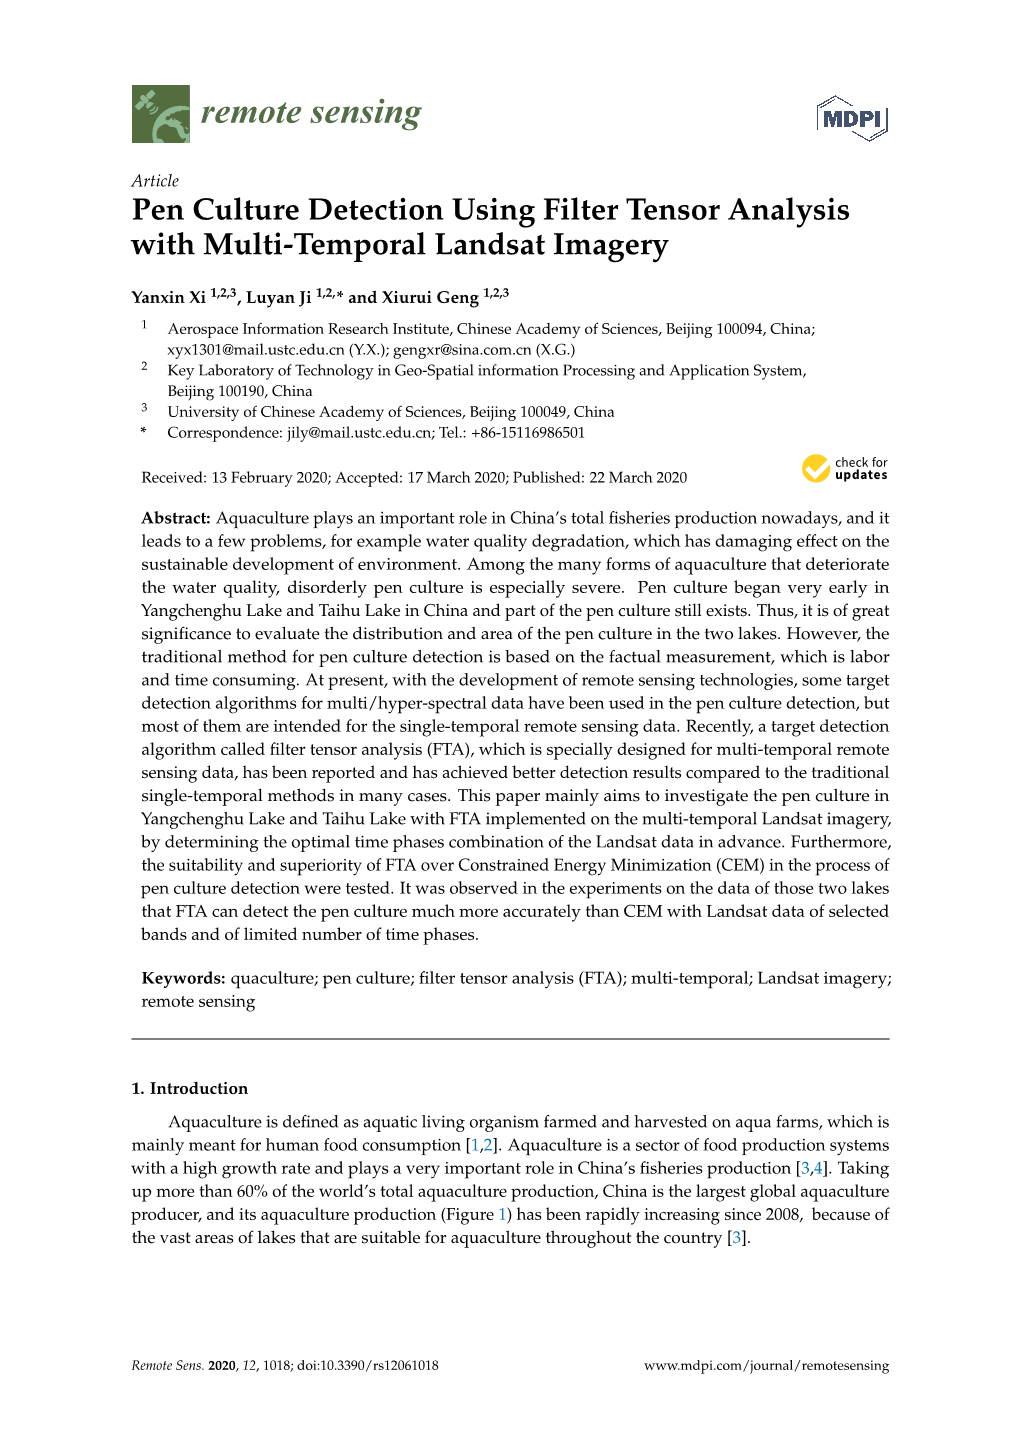 Pen Culture Detection Using Filter Tensor Analysis with Multi-Temporal Landsat Imagery